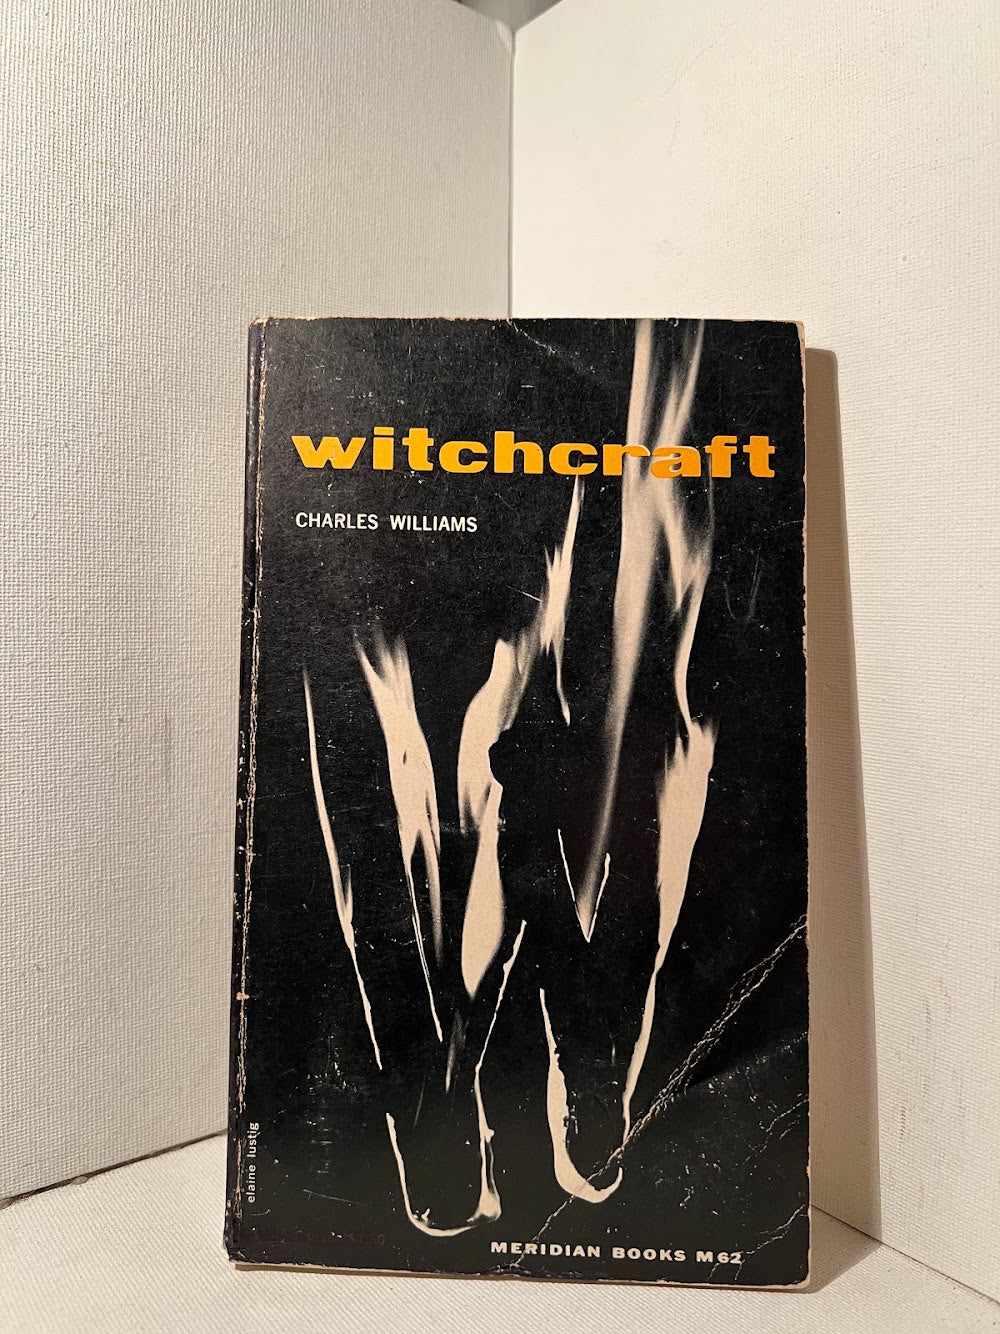 Witchcraft by Charles Williams